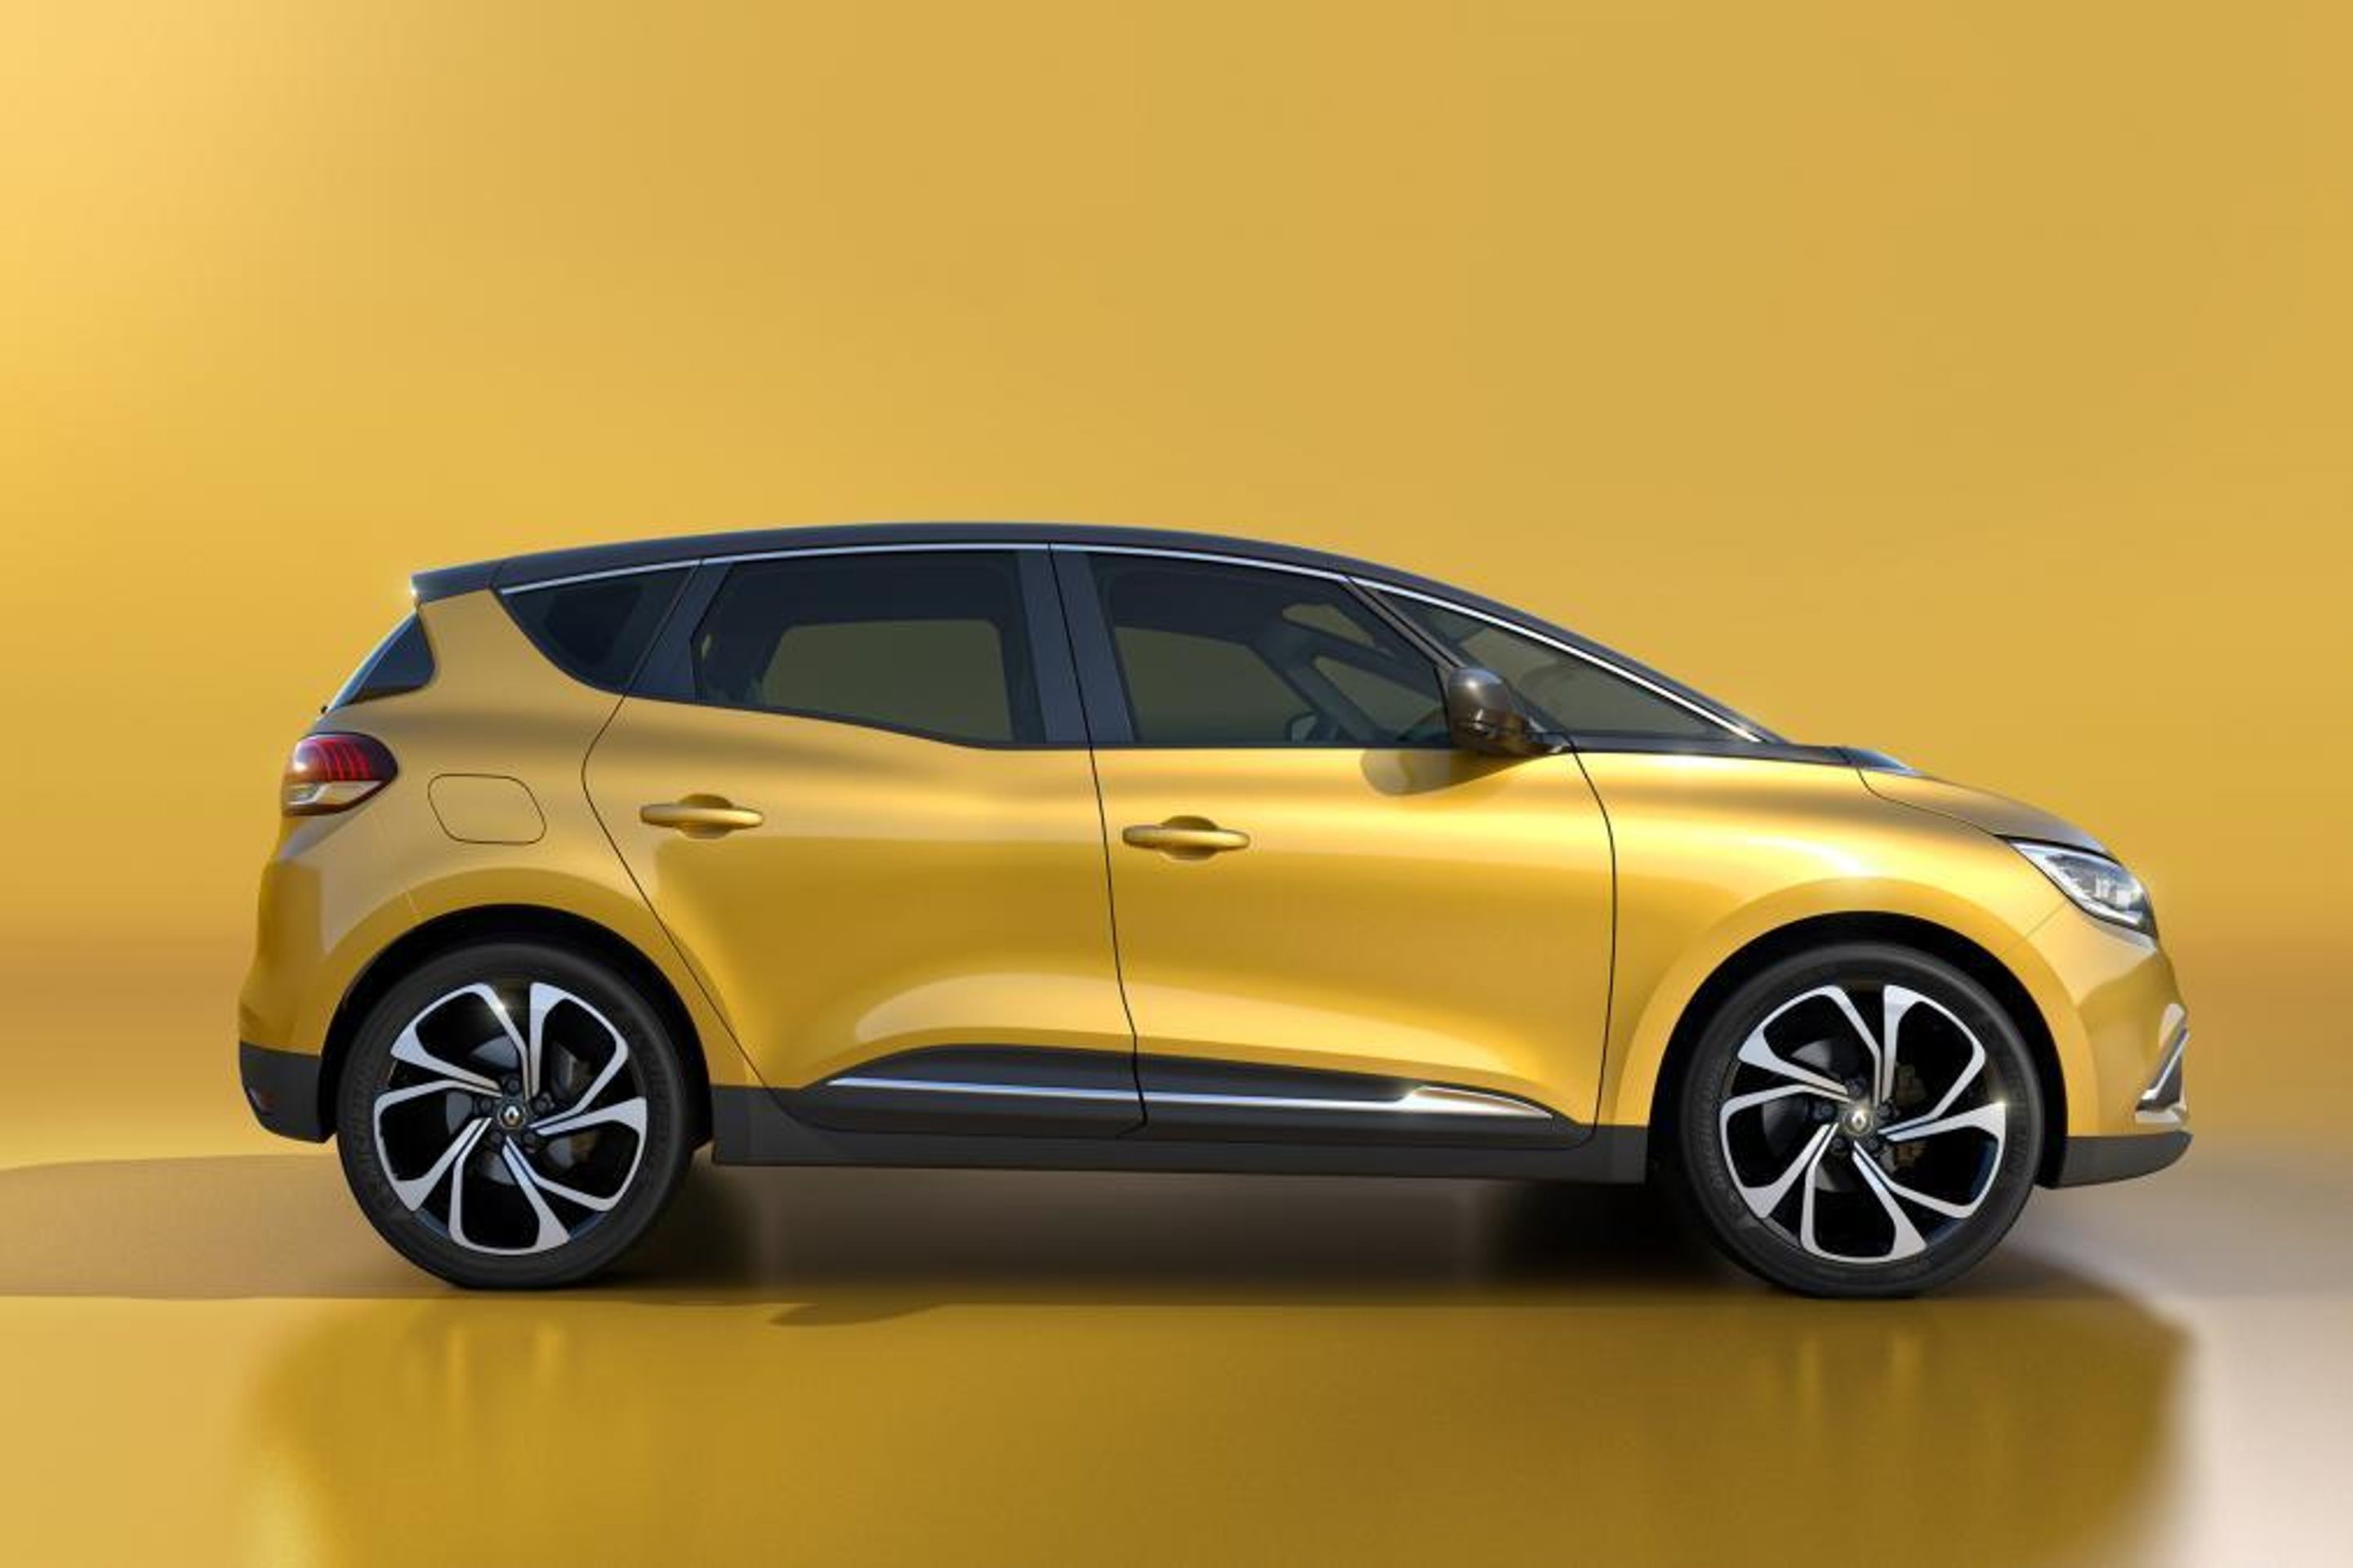 Renault Scénic a Grand Scénic - 28 - GALERIE: Renault Scénic a Grand Scénic (1/14)